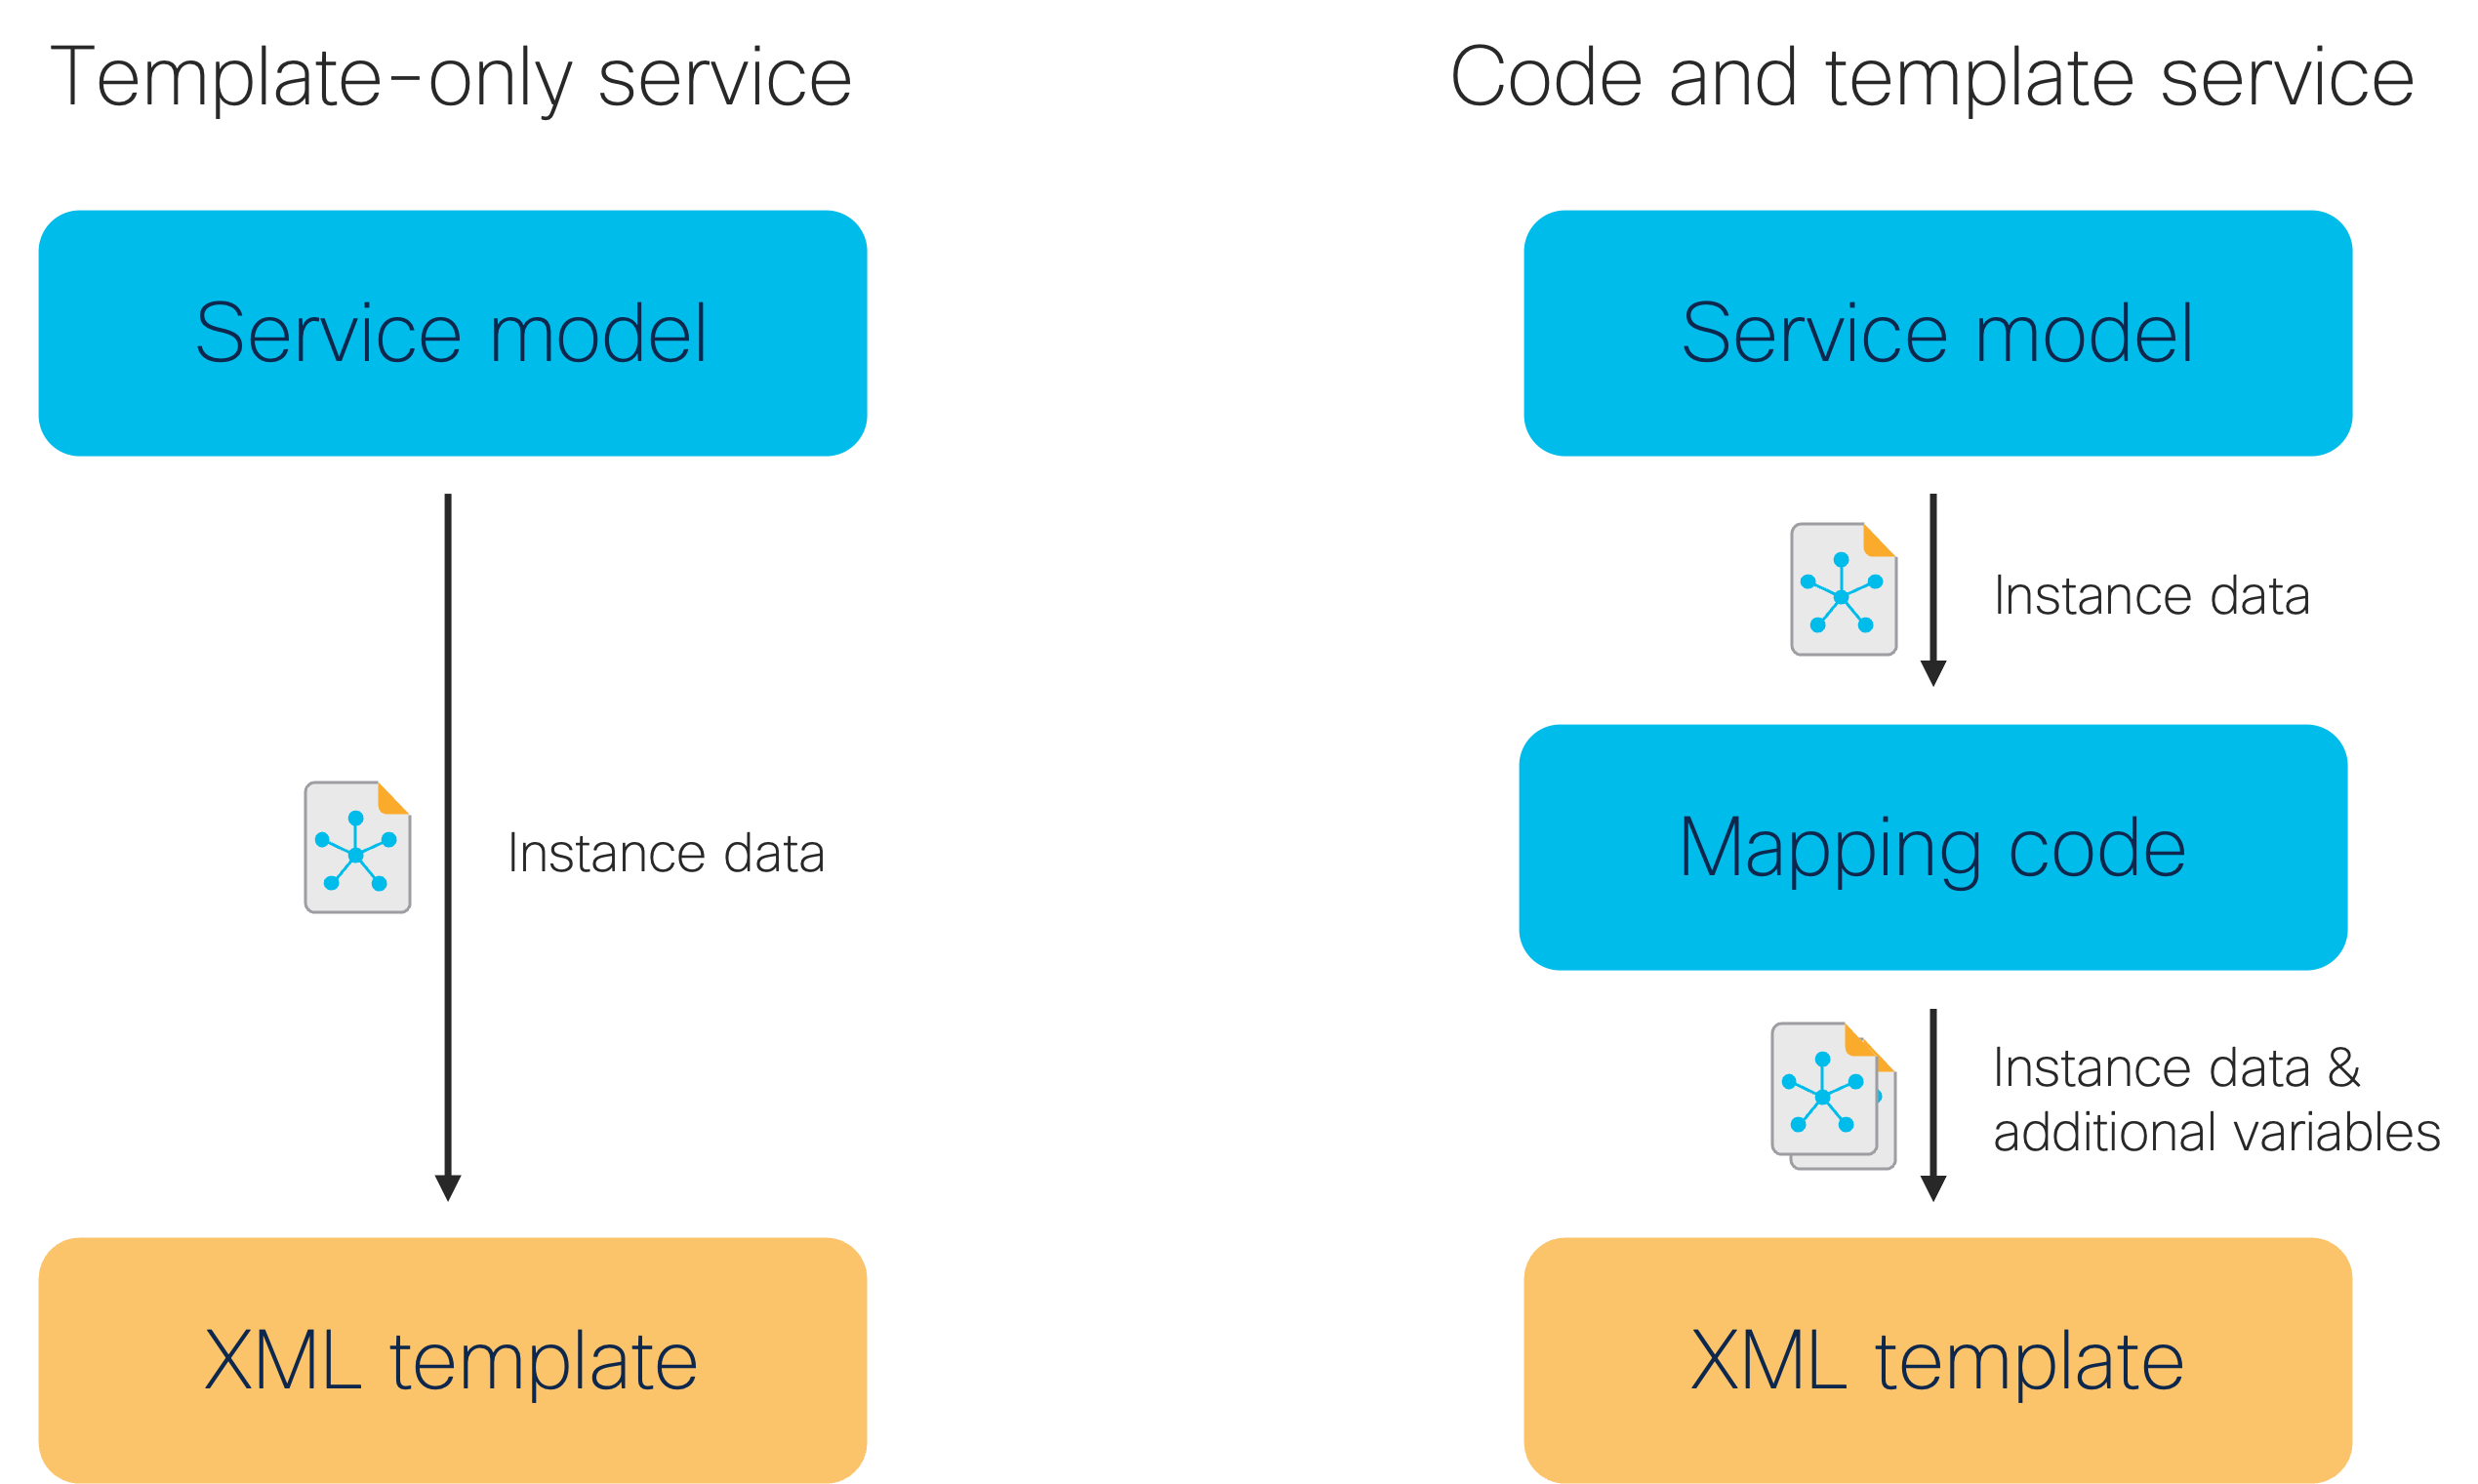 Code and template service compared to template-only service